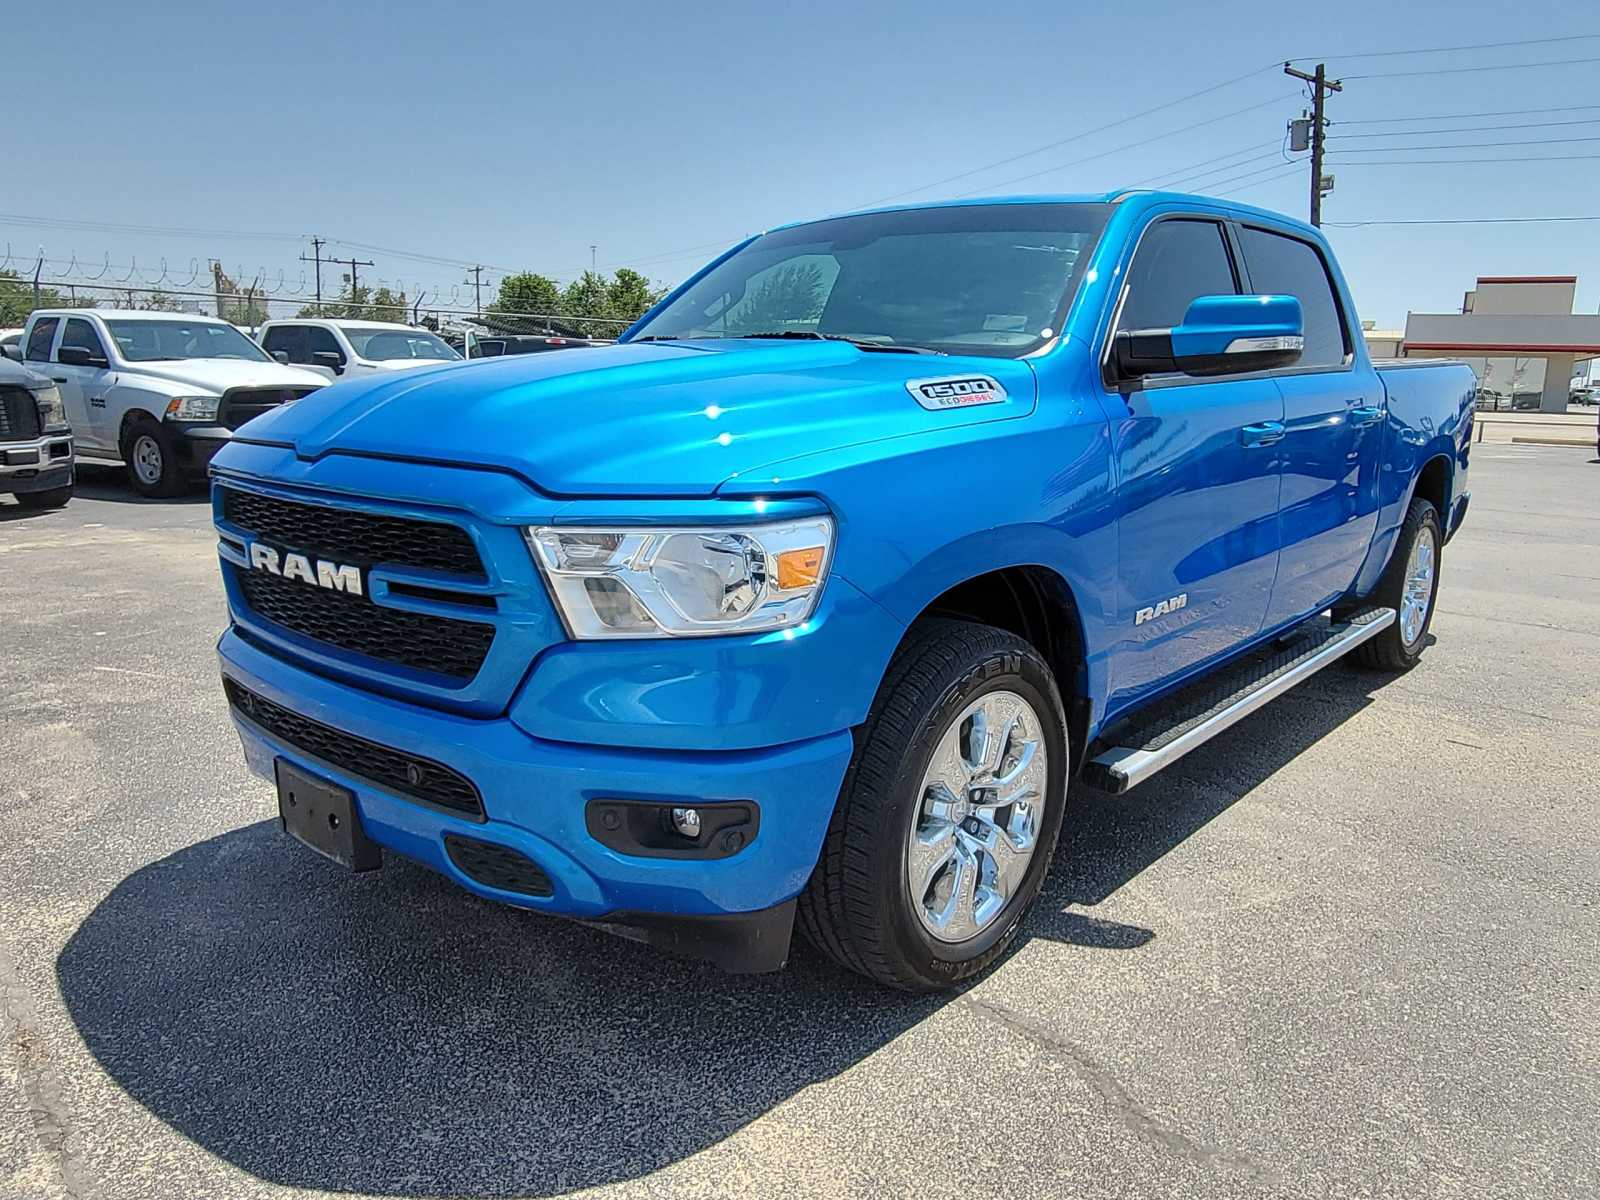 Used 2022 RAM Ram 1500 Pickup Big Horn/Lone Star with VIN 1C6RREFM8NN436262 for sale in Midland, TX